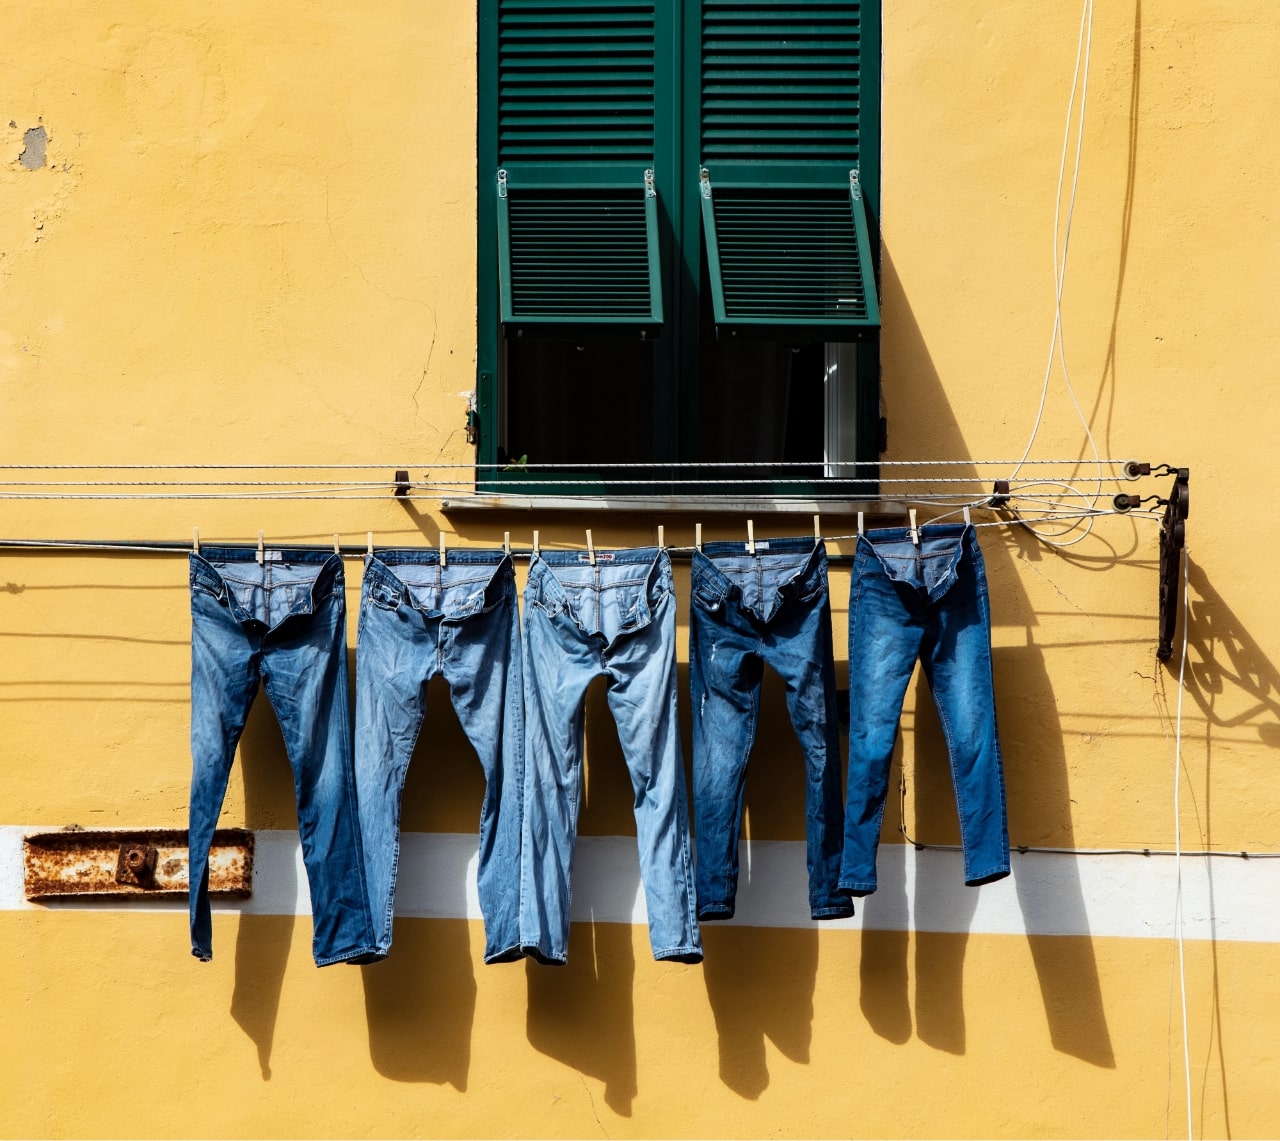 Bunch of pants hanged to dry outside a balcony in a yellow building